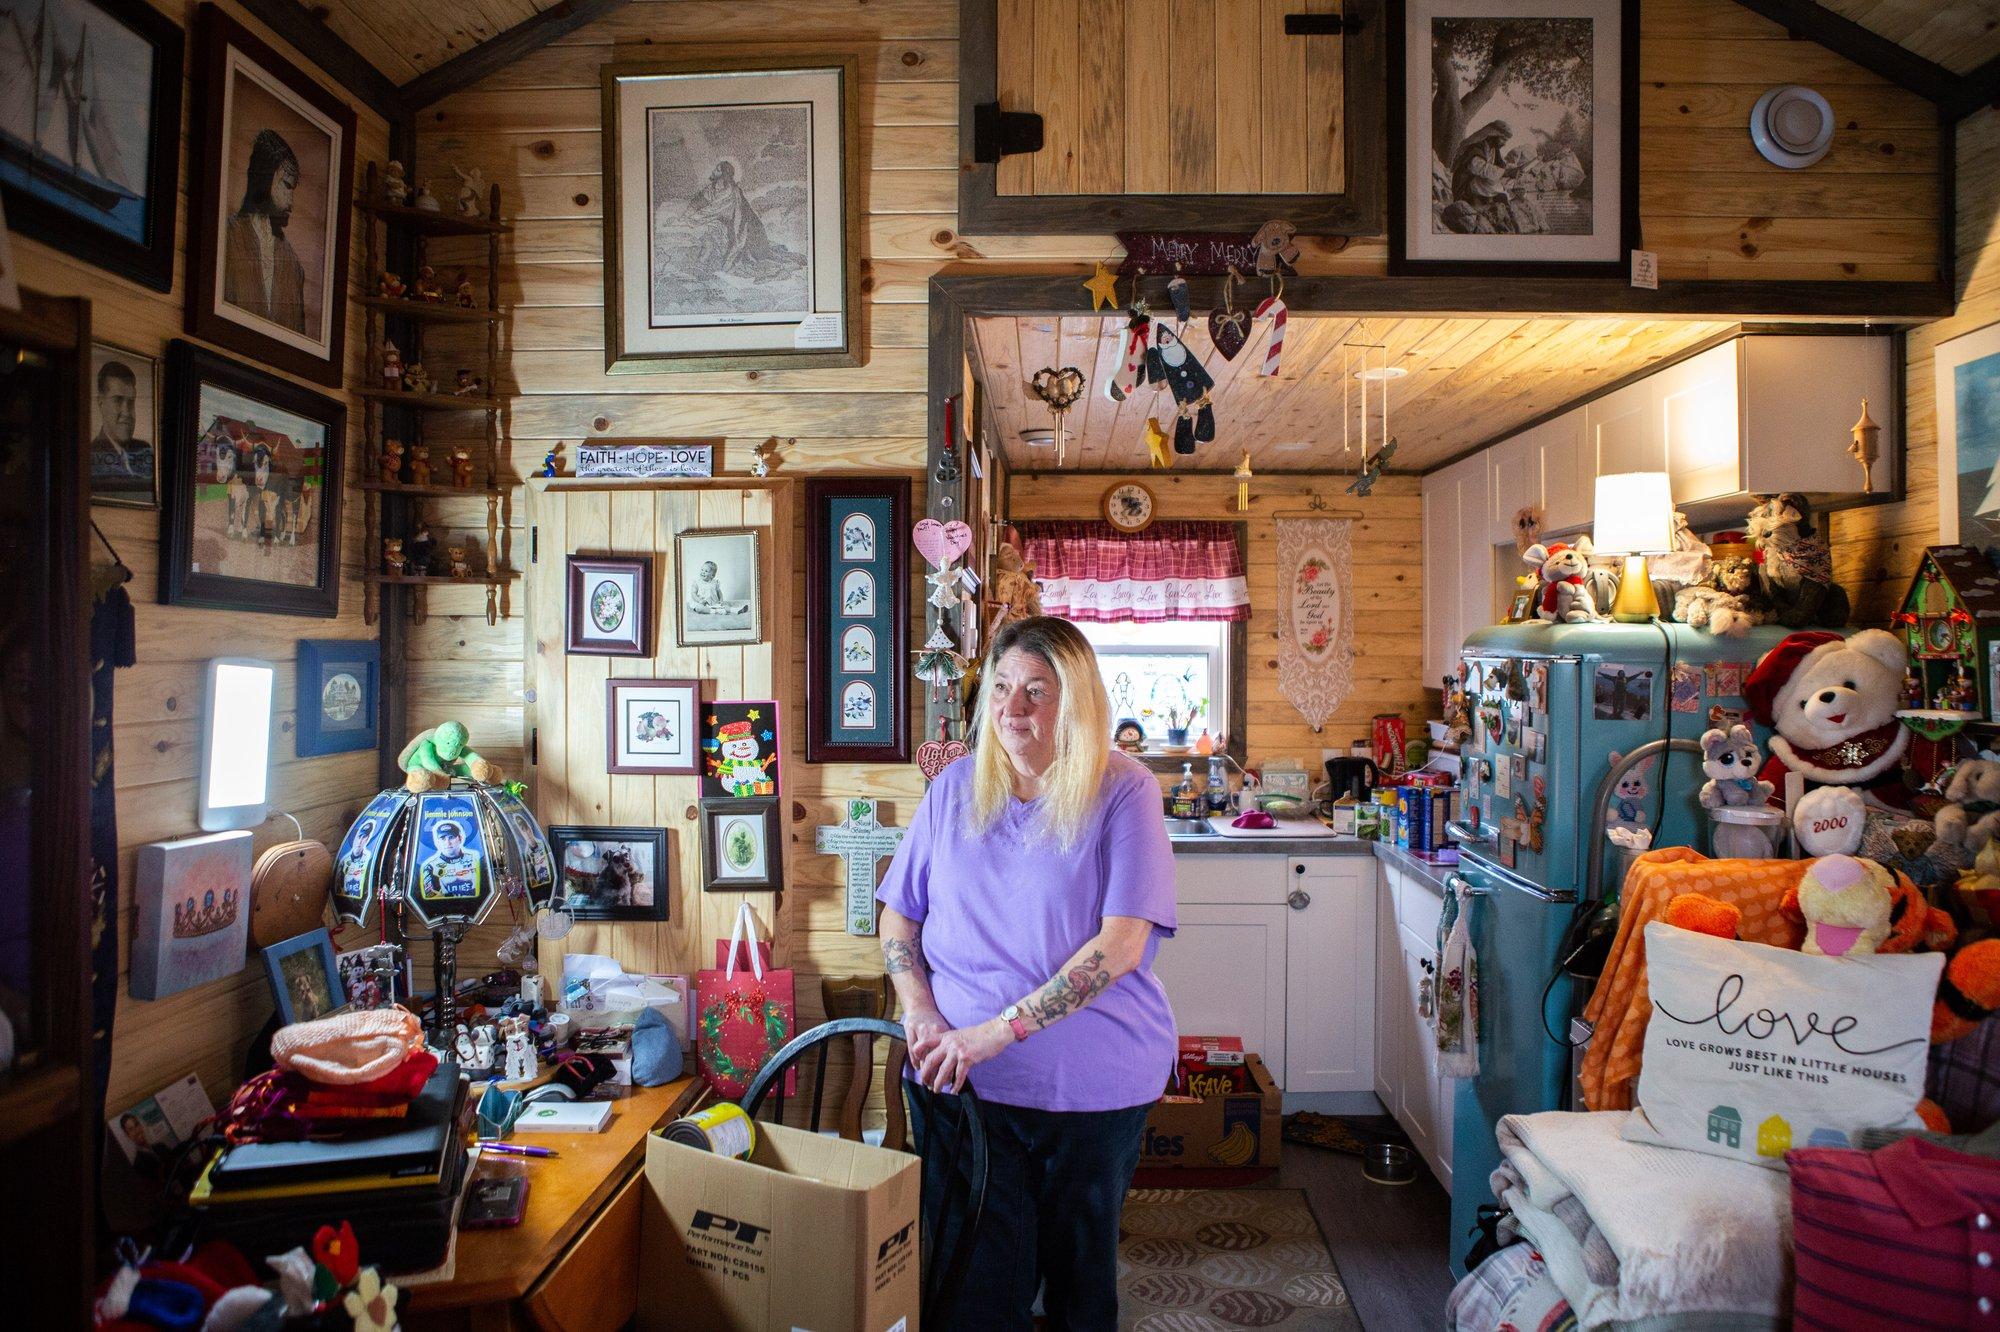 A woman in a purple sweater standing in a tiny home, with wooden walls covered in framed art